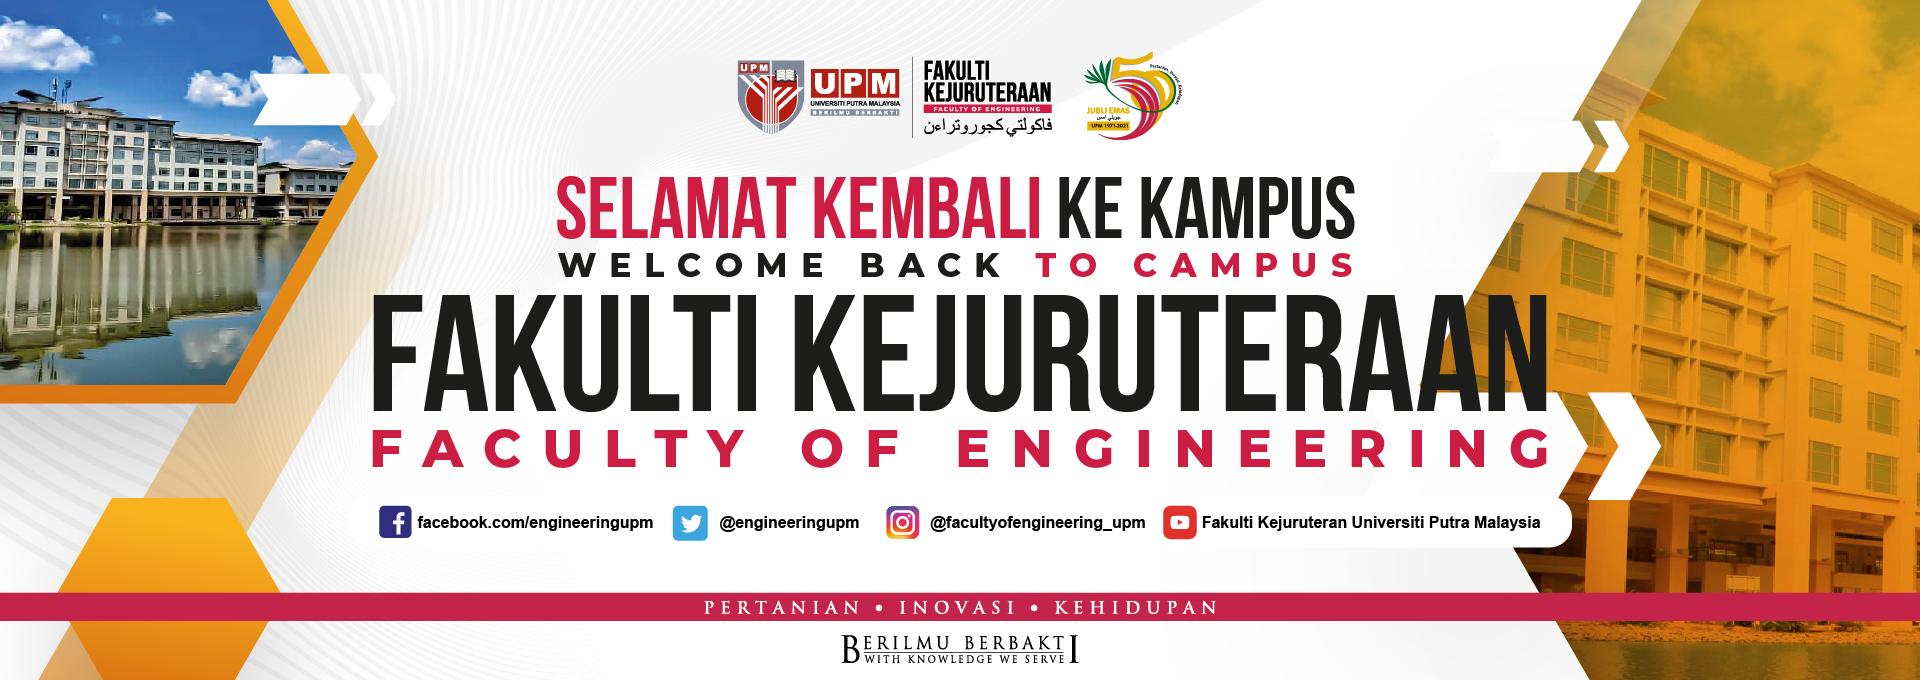 Welcome Back to Faculty of Engineering